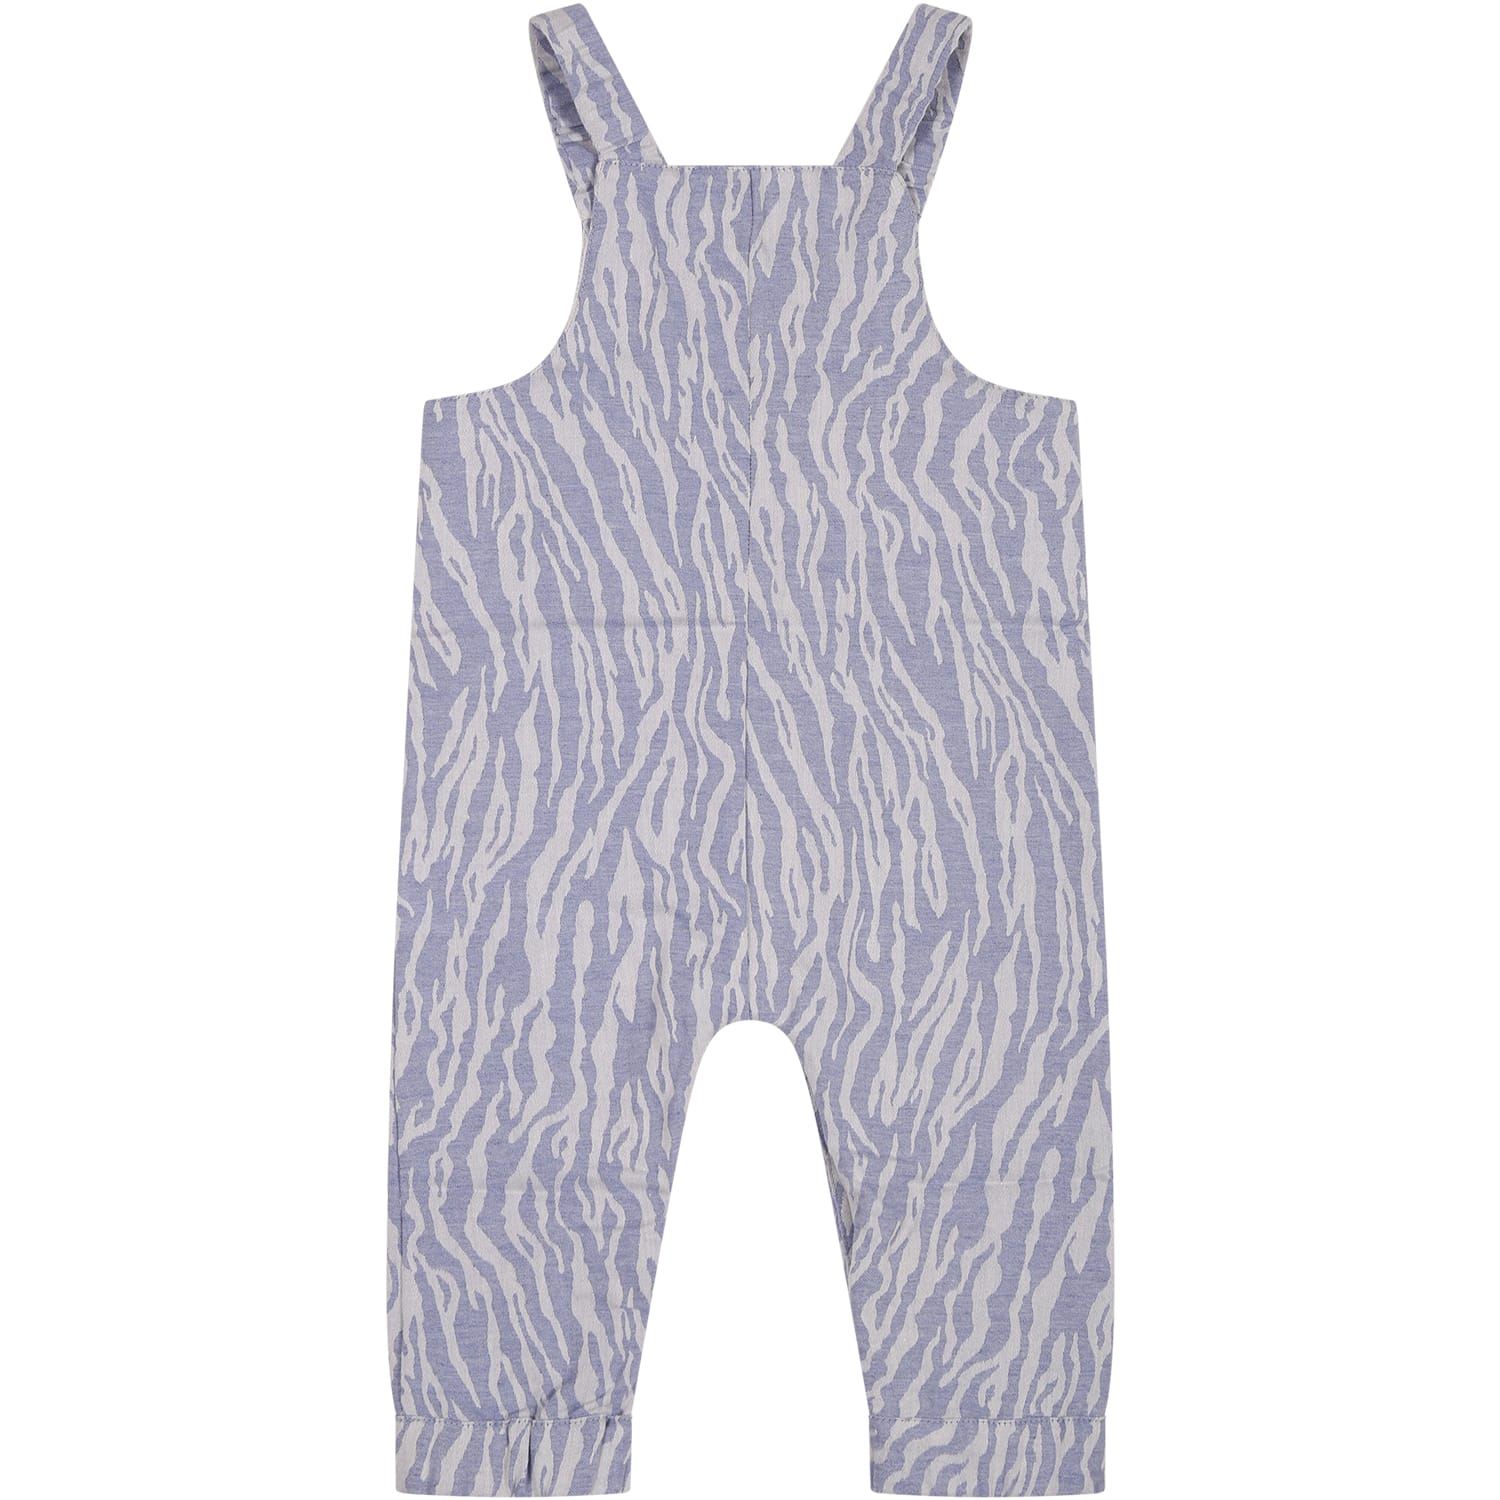 Kenzo Boys' Tiger Print Chambray Overalls & Logo Tee Set - Baby In Pale Blue